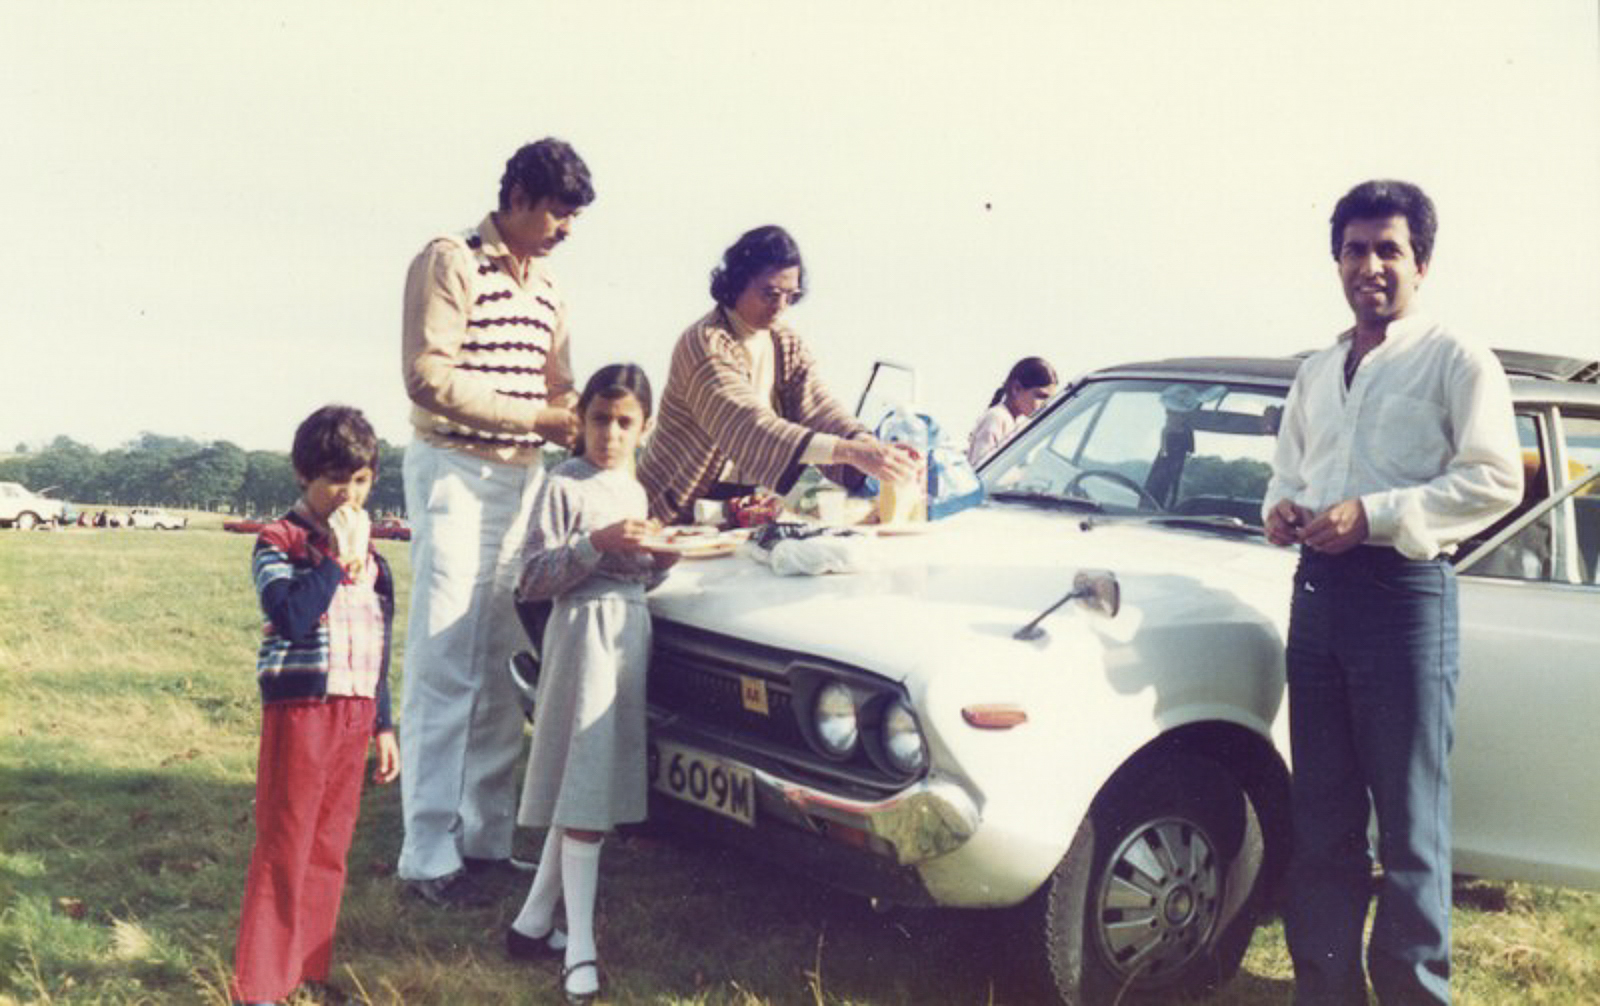 Picnic with a Datsun / Everyday Muslim Archive